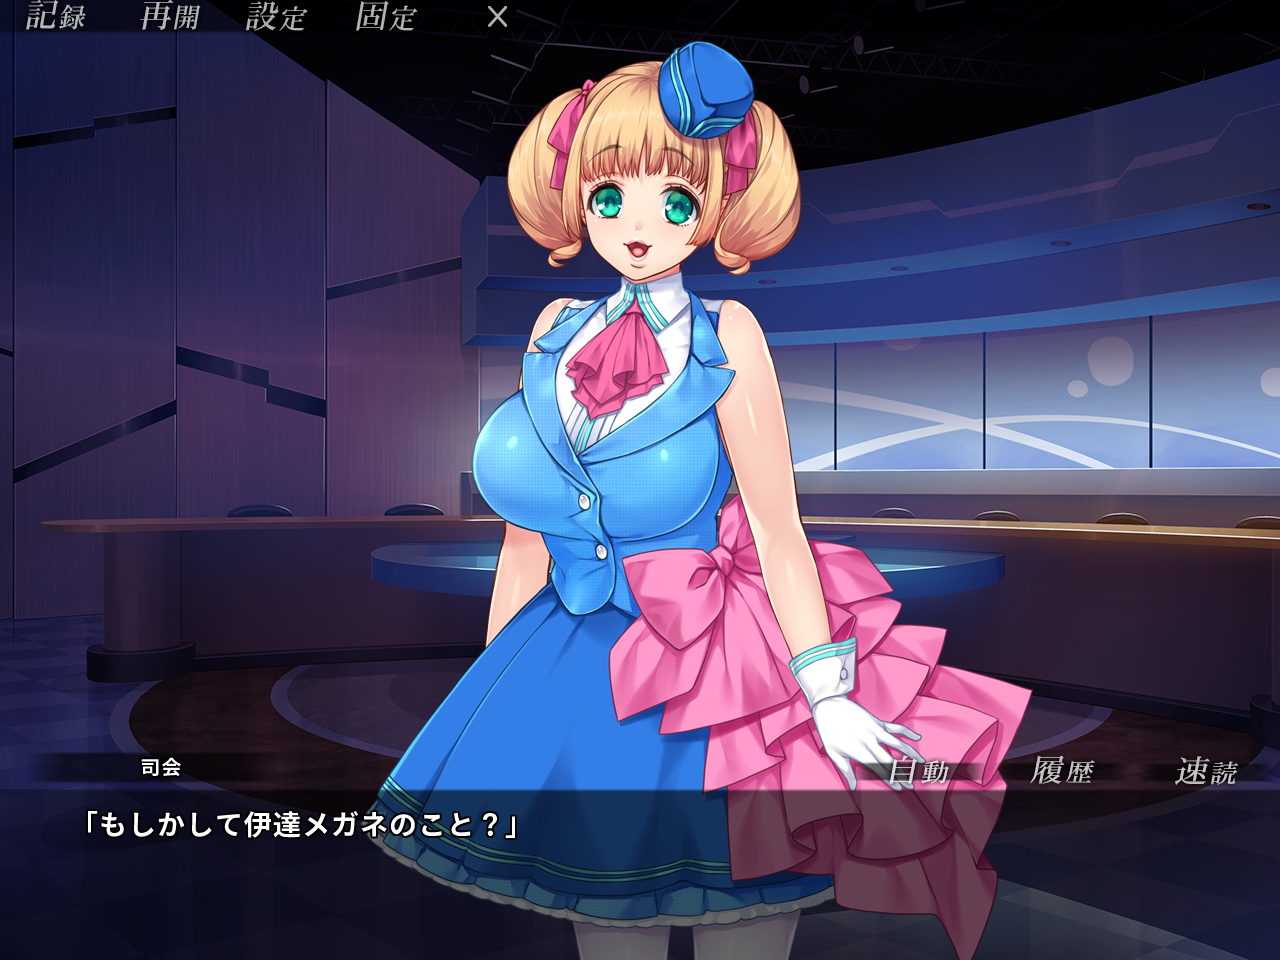 Shikijou Kyoudan screenshots, images and pictures - Giant Bomb